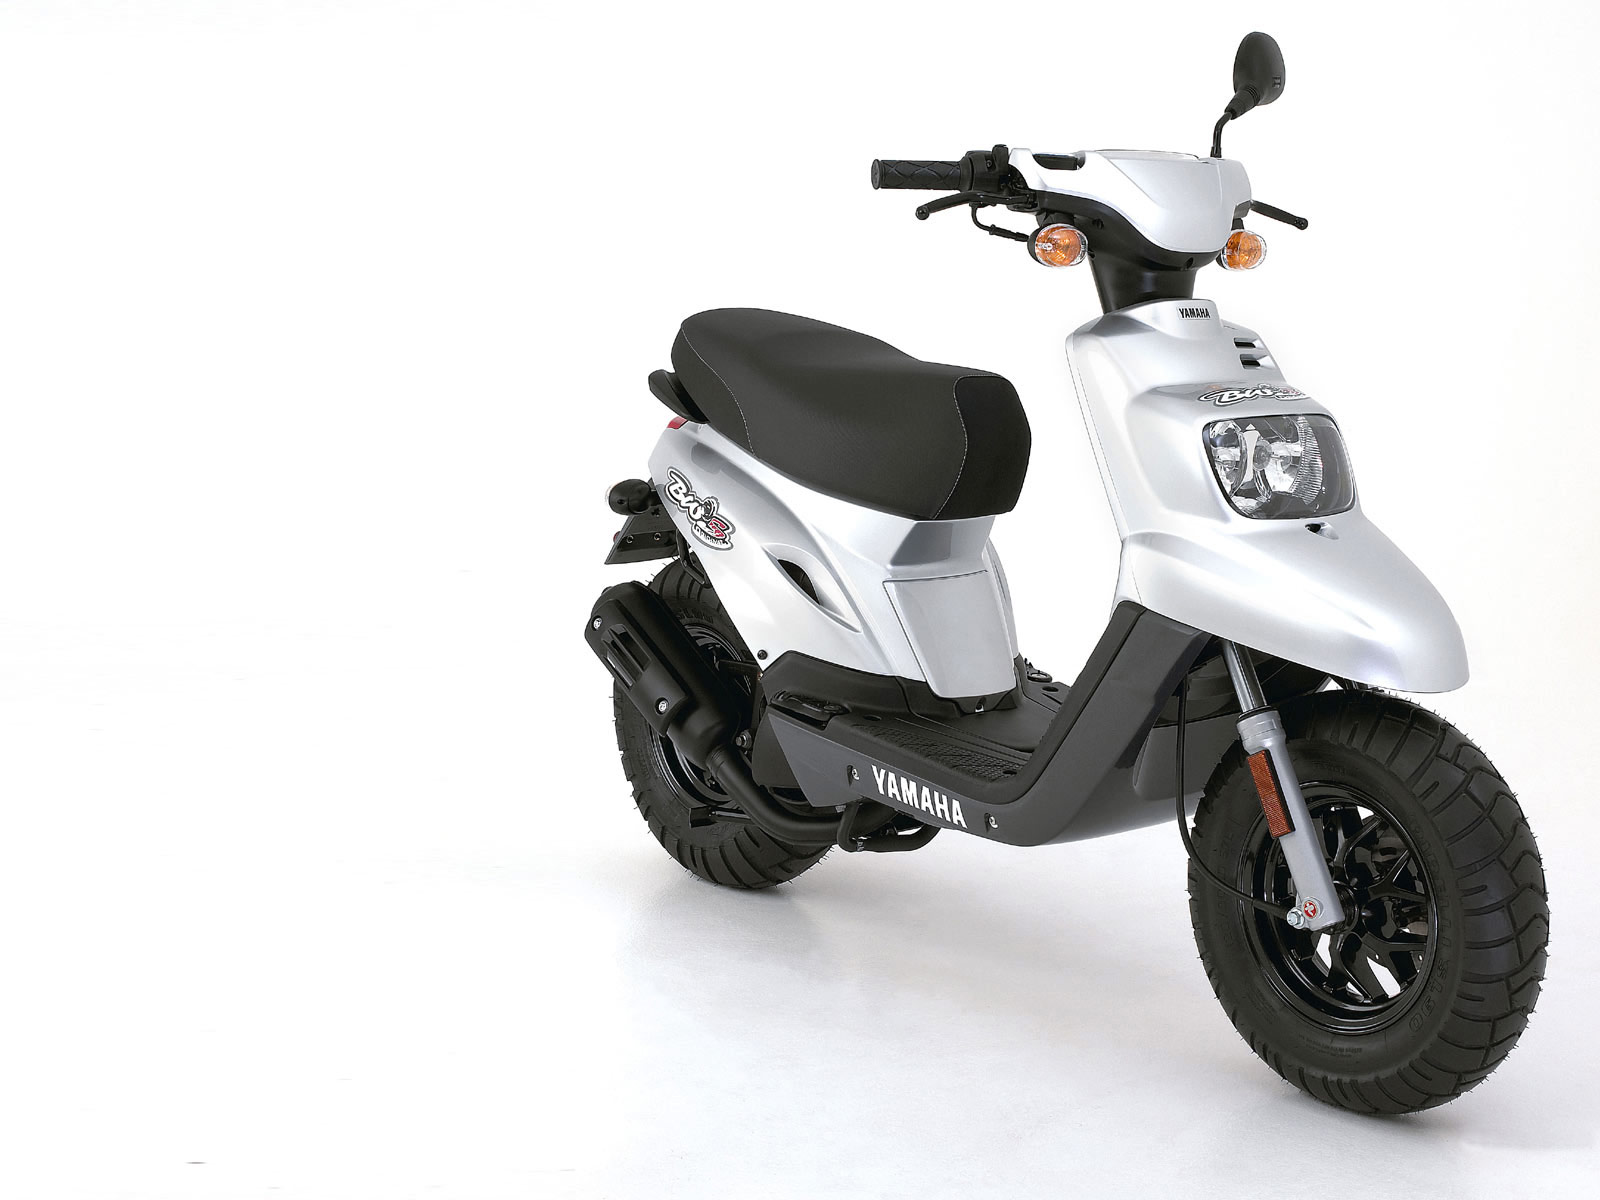 2005 YAMAHA BWs Scooter pictures, insurance information | Cars Games Today